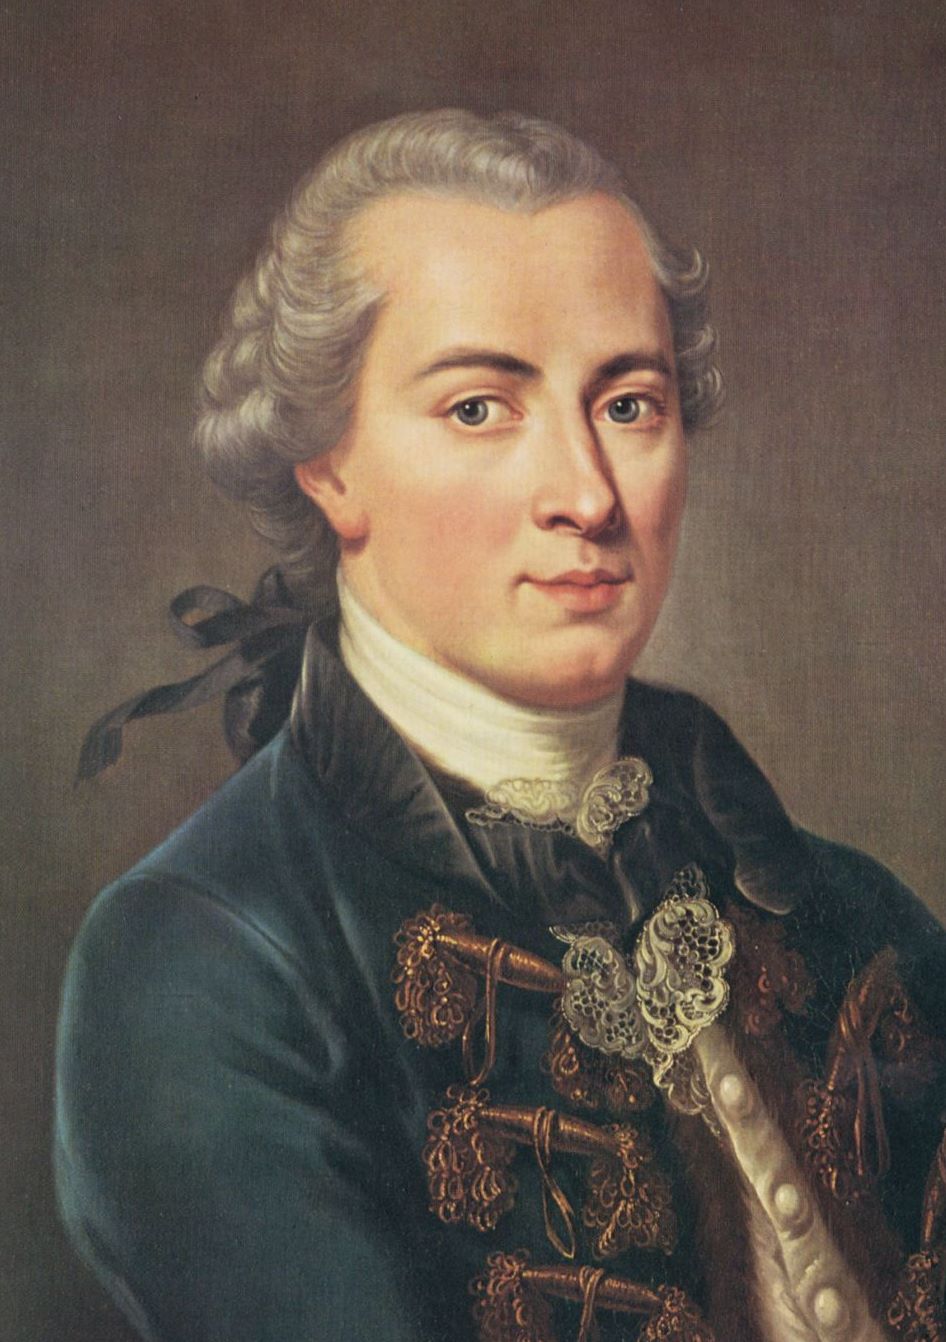 Order paper analyzing the political thoughts of immanuel kant and g.w.f. hegel